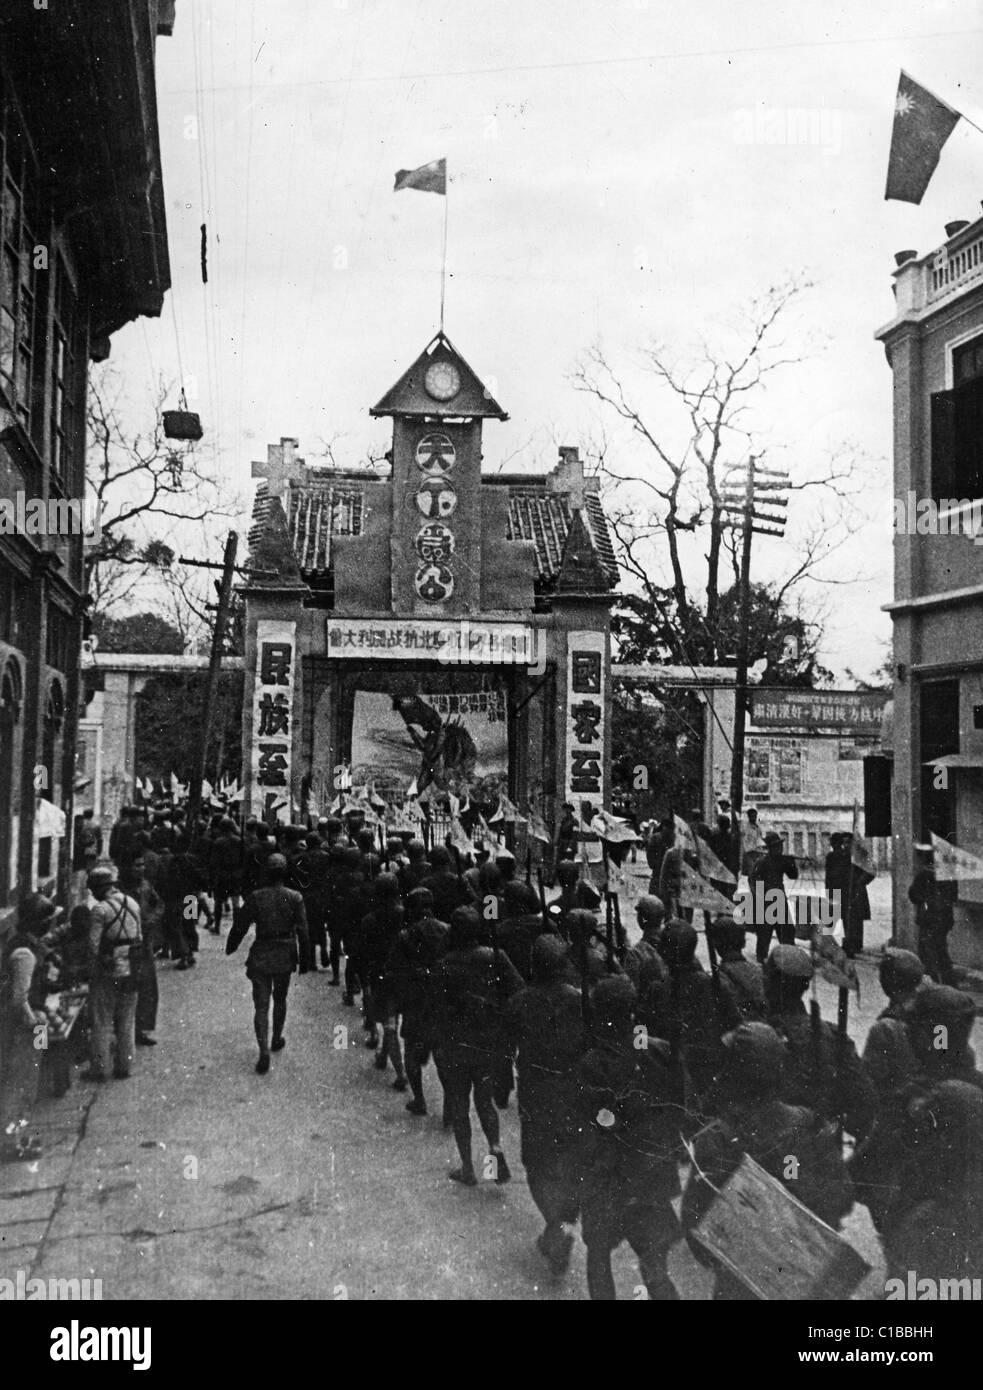 SINO-JAPANESE WAR Chinese soldiers in Shaokwan, capital of Kwangtung Province. Gate banners are a poem to the city and province. Stock Photo